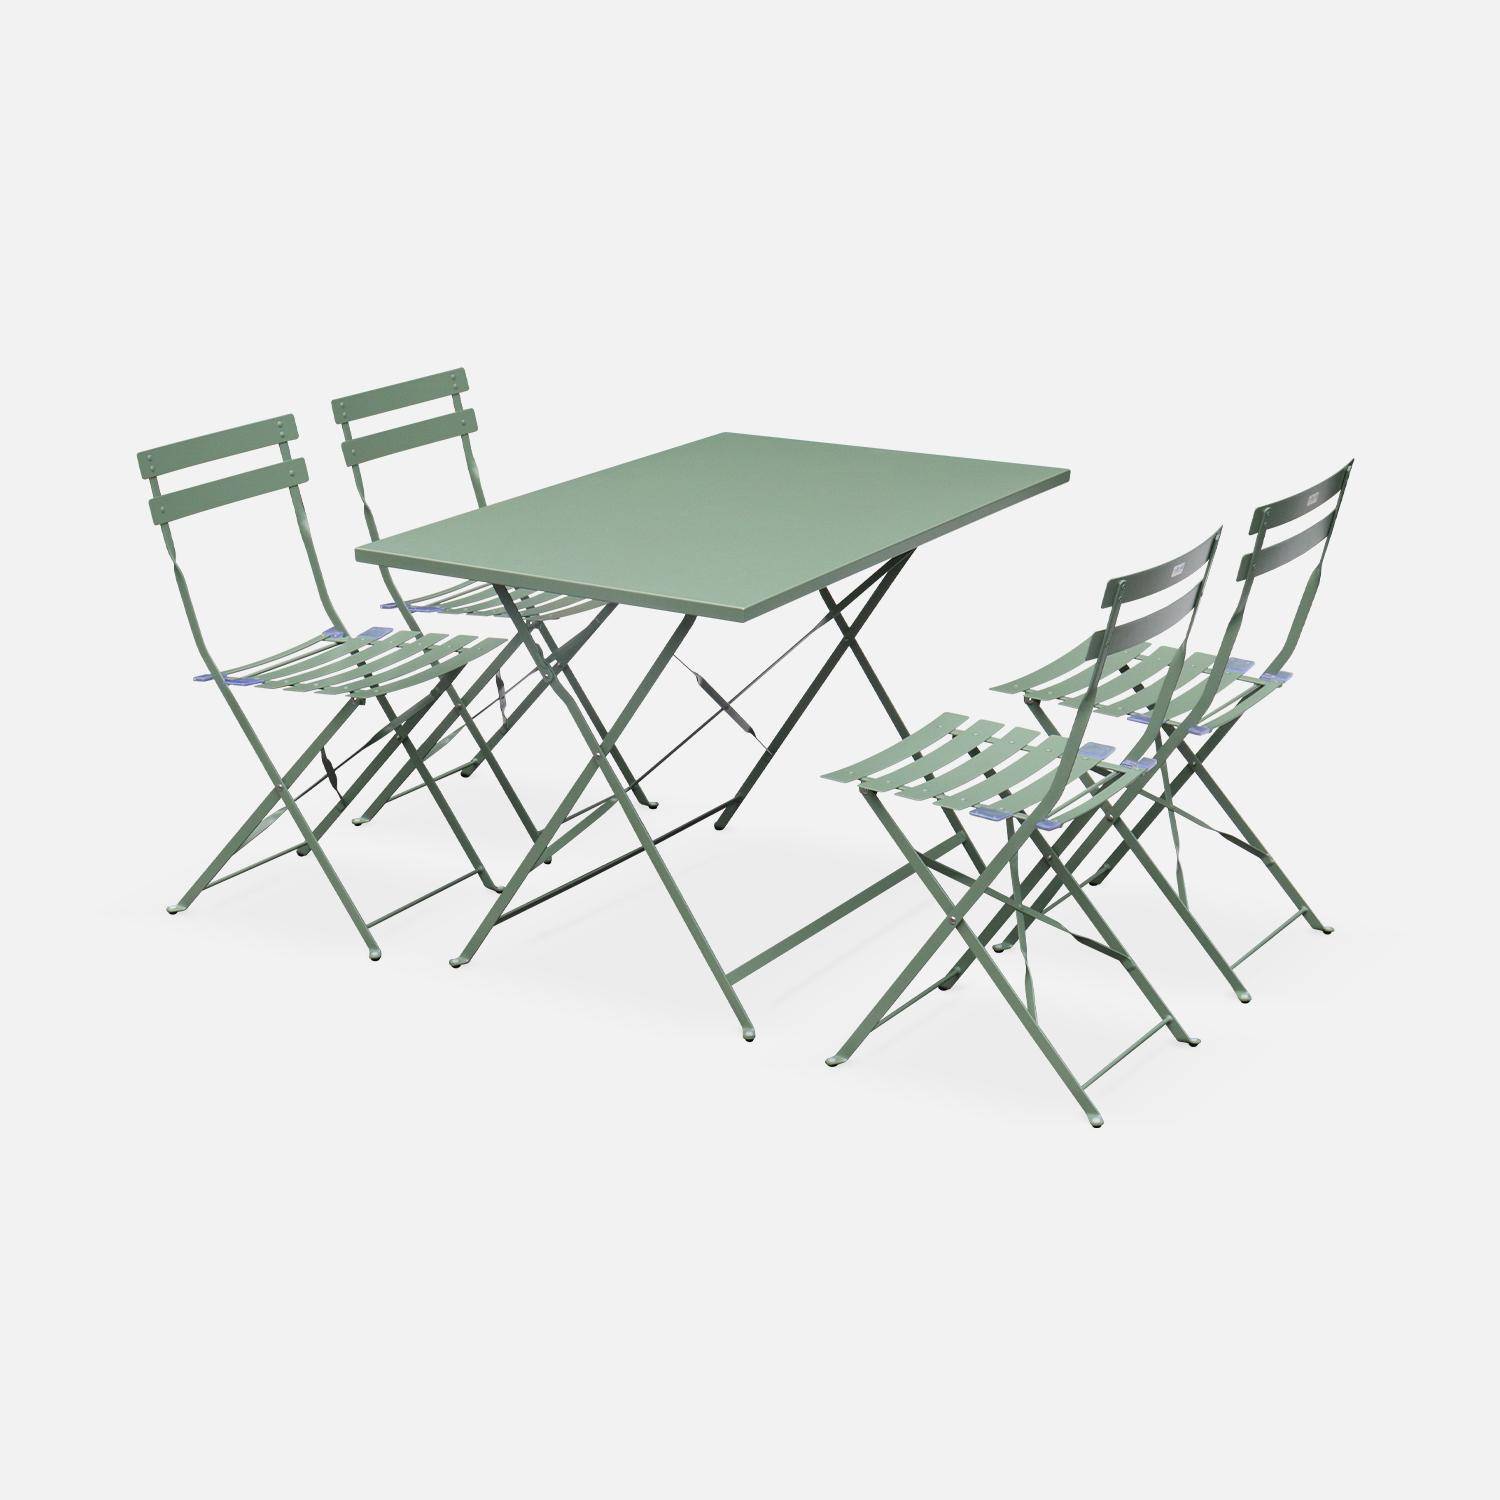 4-seater foldable thermo-lacquered steel bistro garden table with chairs, 110x70cm - Emilia - Sage green,sweeek,Photo2